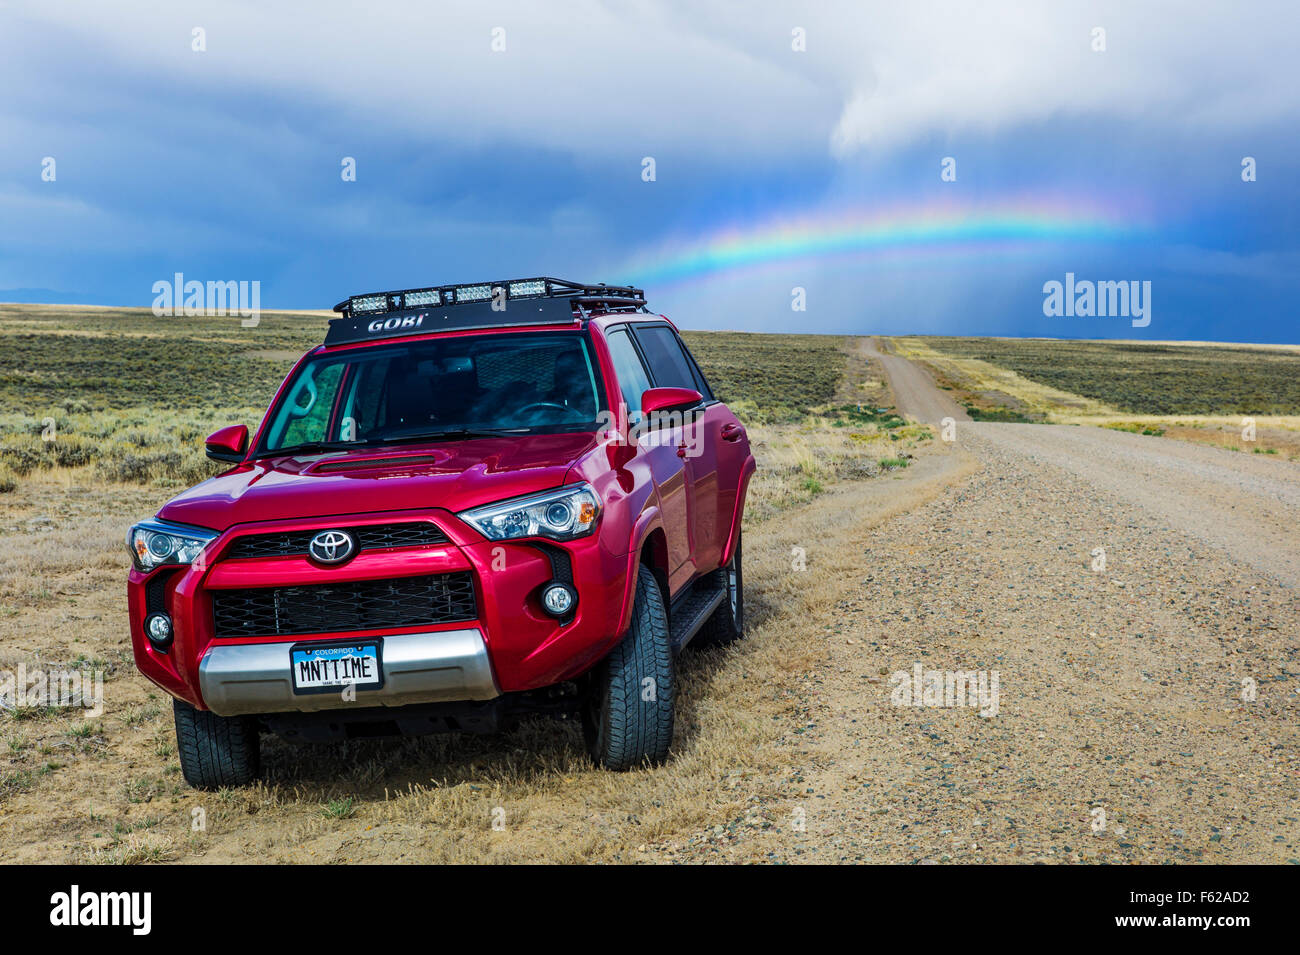 Toyota 4Runner SUV & Rainbow off highway 789 near Creston Junction; south central Wyoming; USA Stock Photo